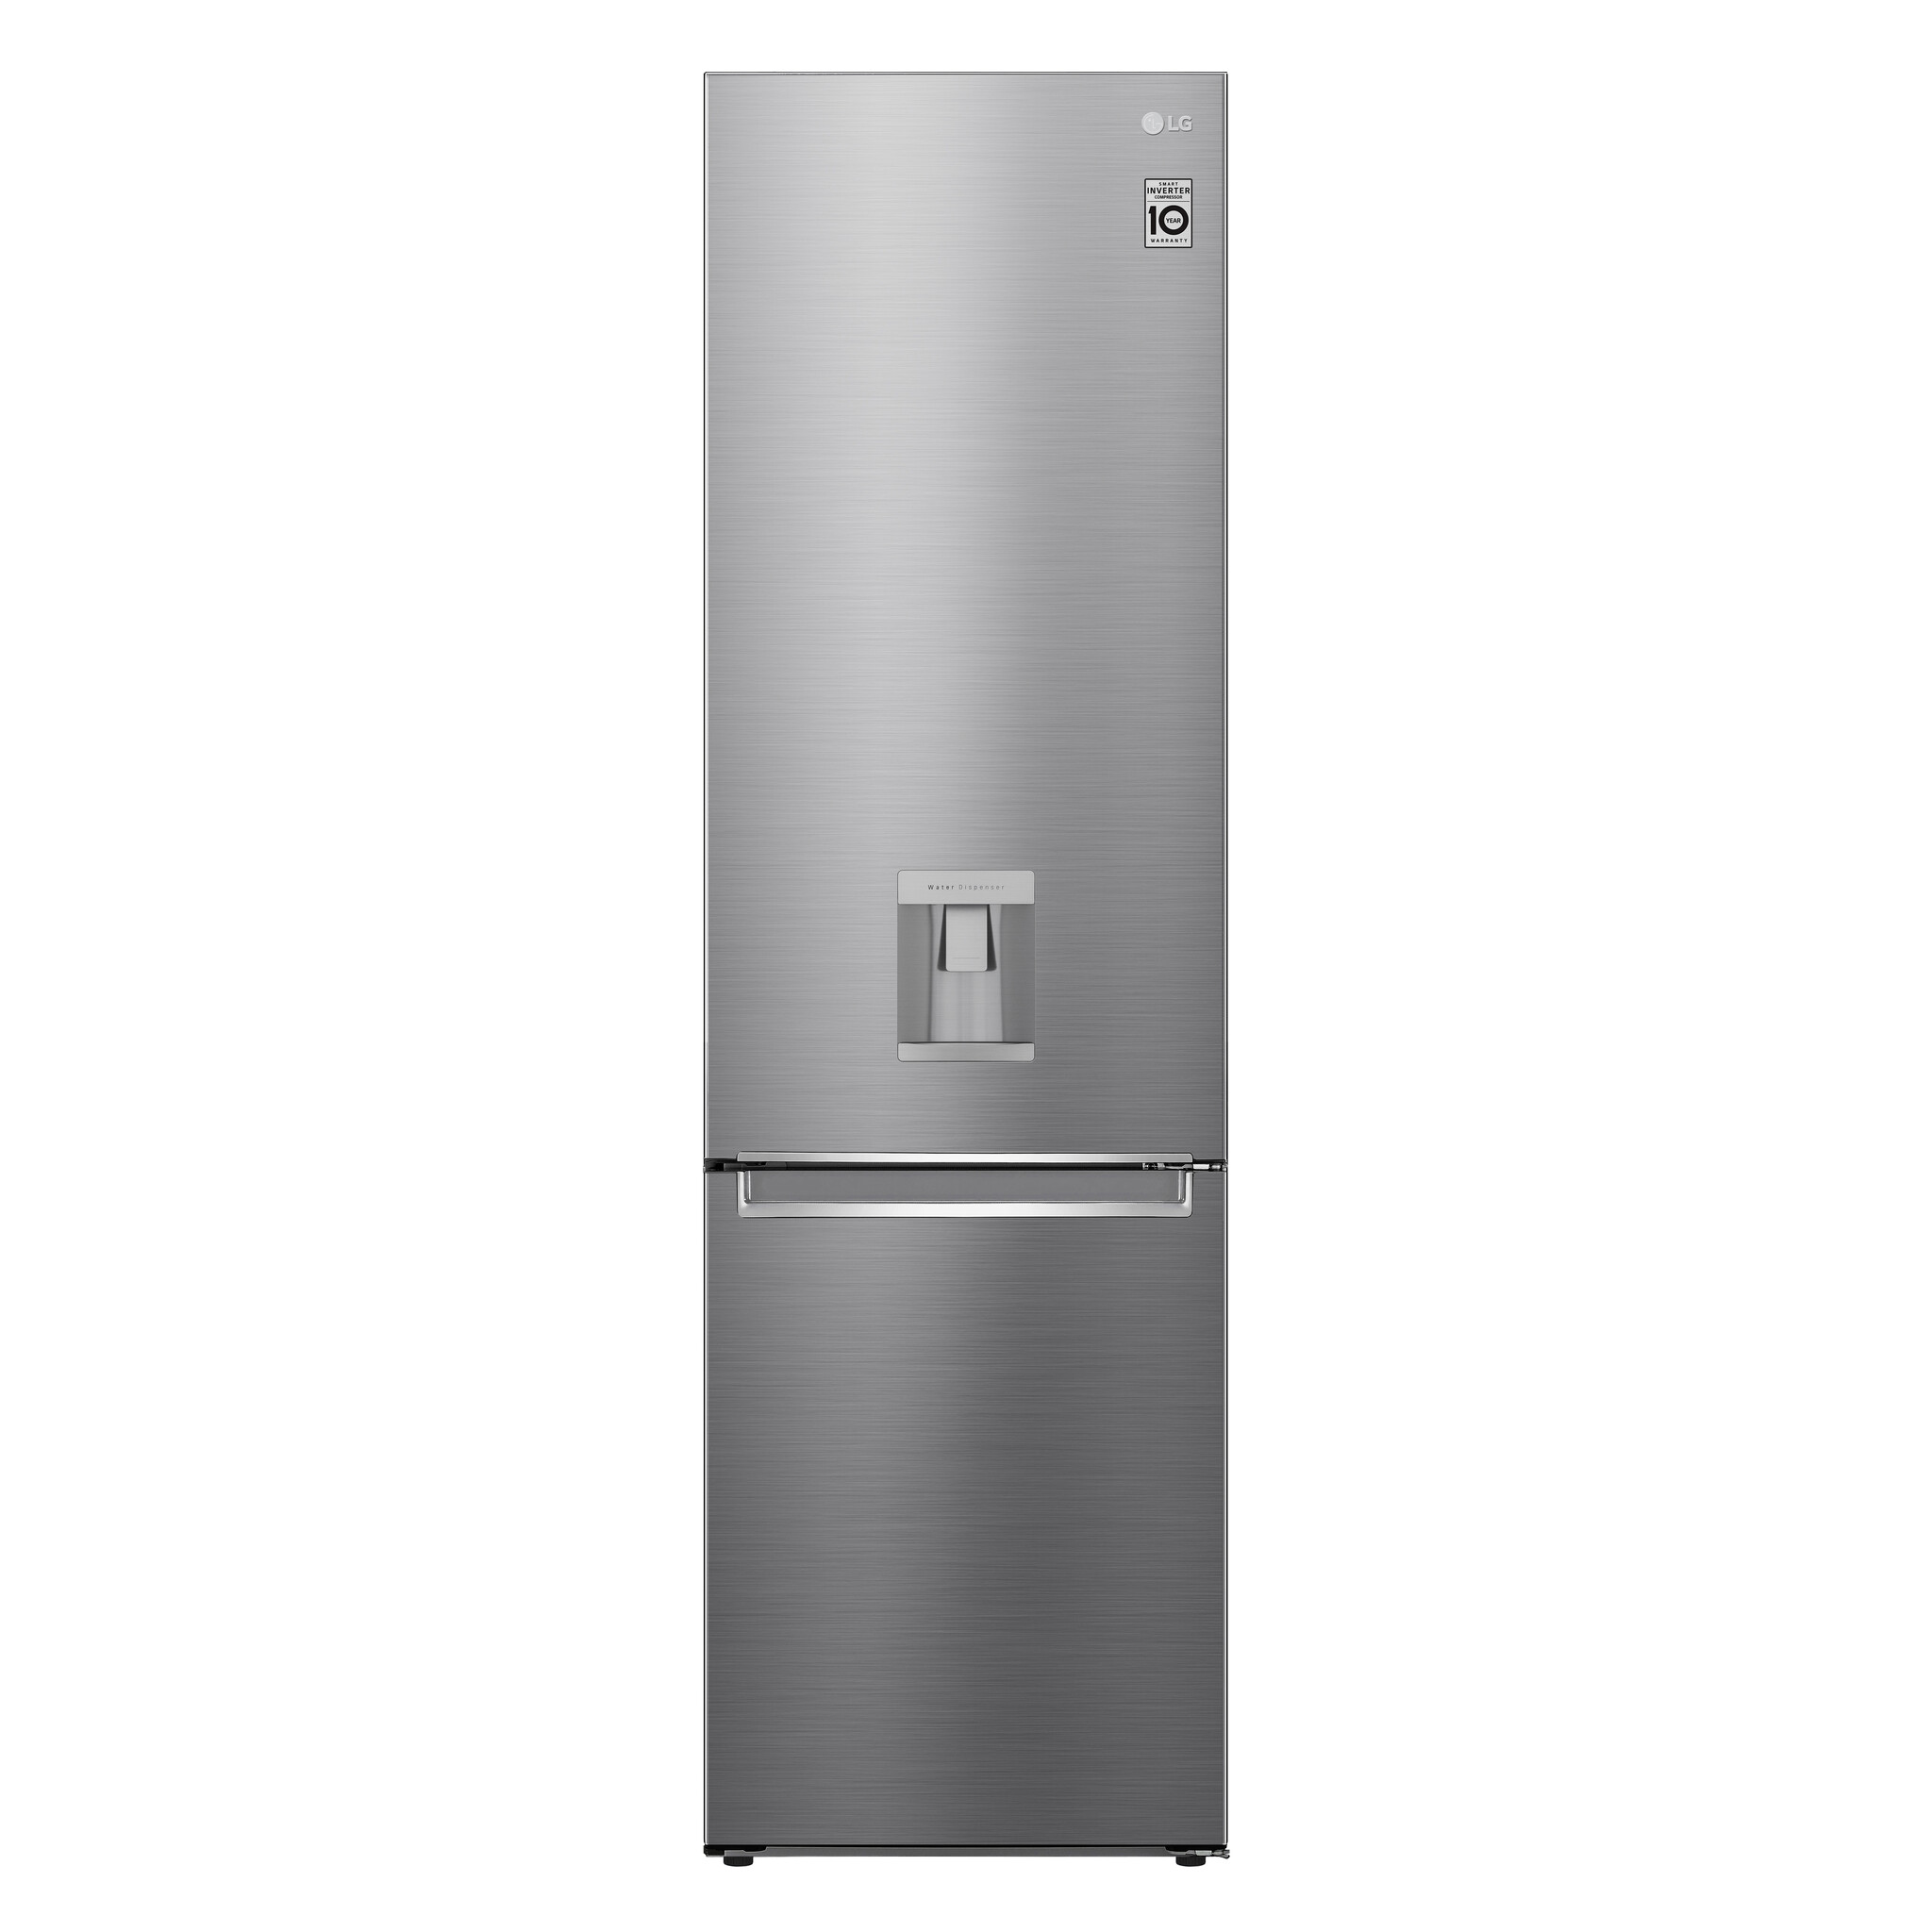 LG NatureFRESH™ GBF62PZGGN Frost Free Fridge Freezer – Silver Steel – D Rated #366609